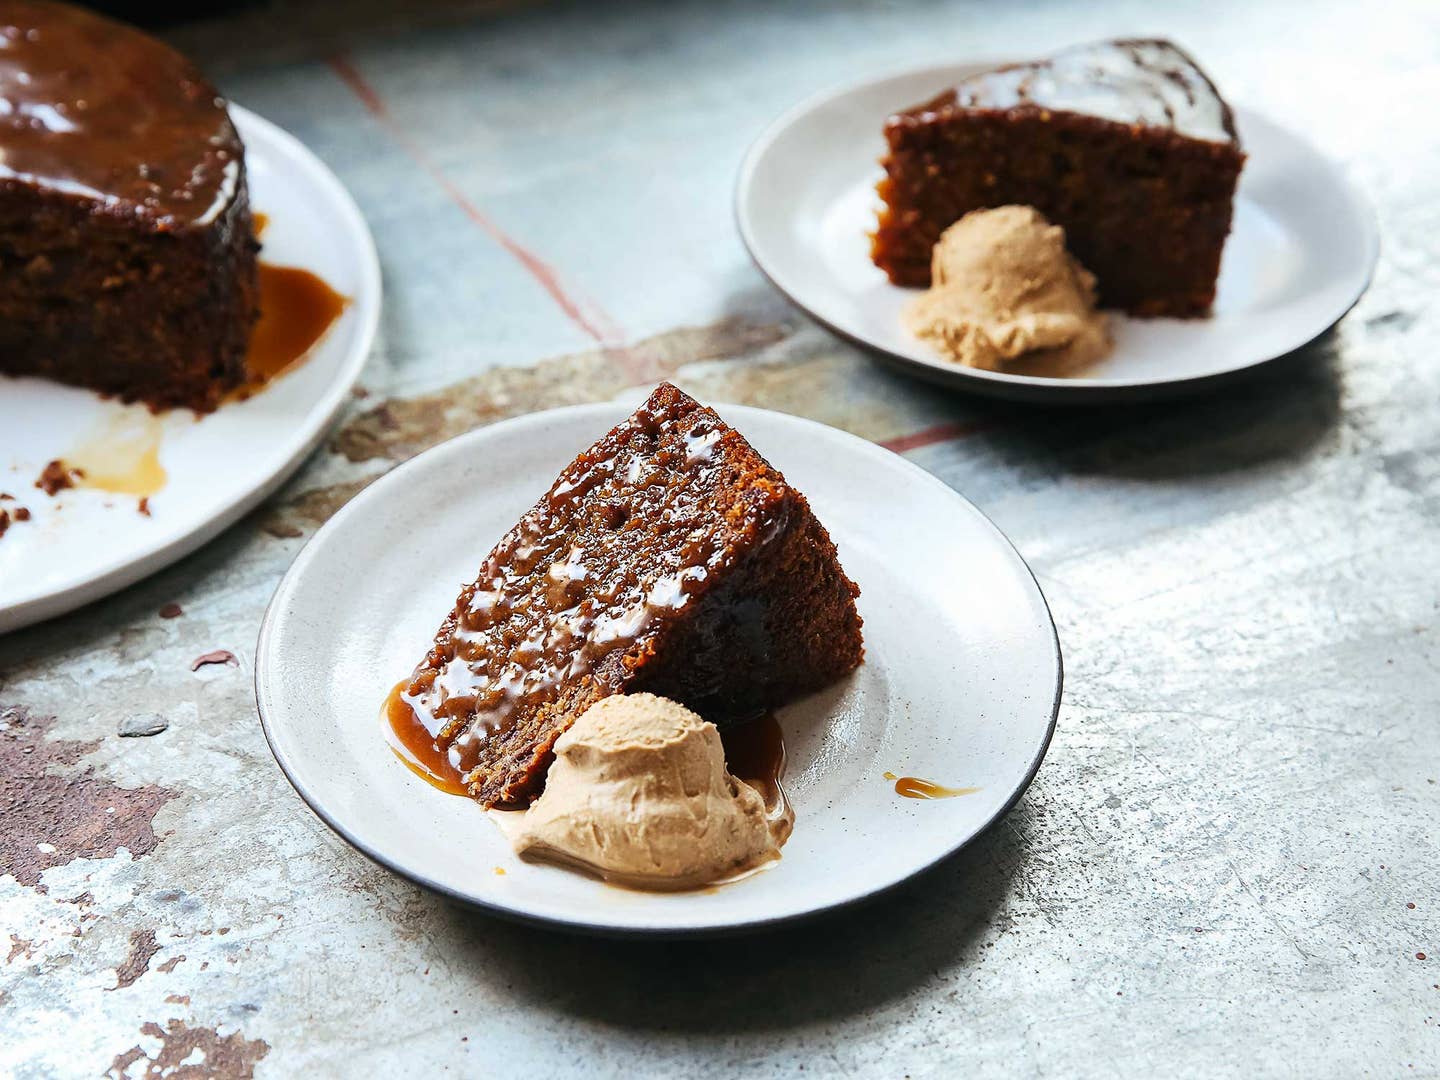 Make This Sticky Toffee Pudding For The Dessert (or Breakfast) of Your Dreams